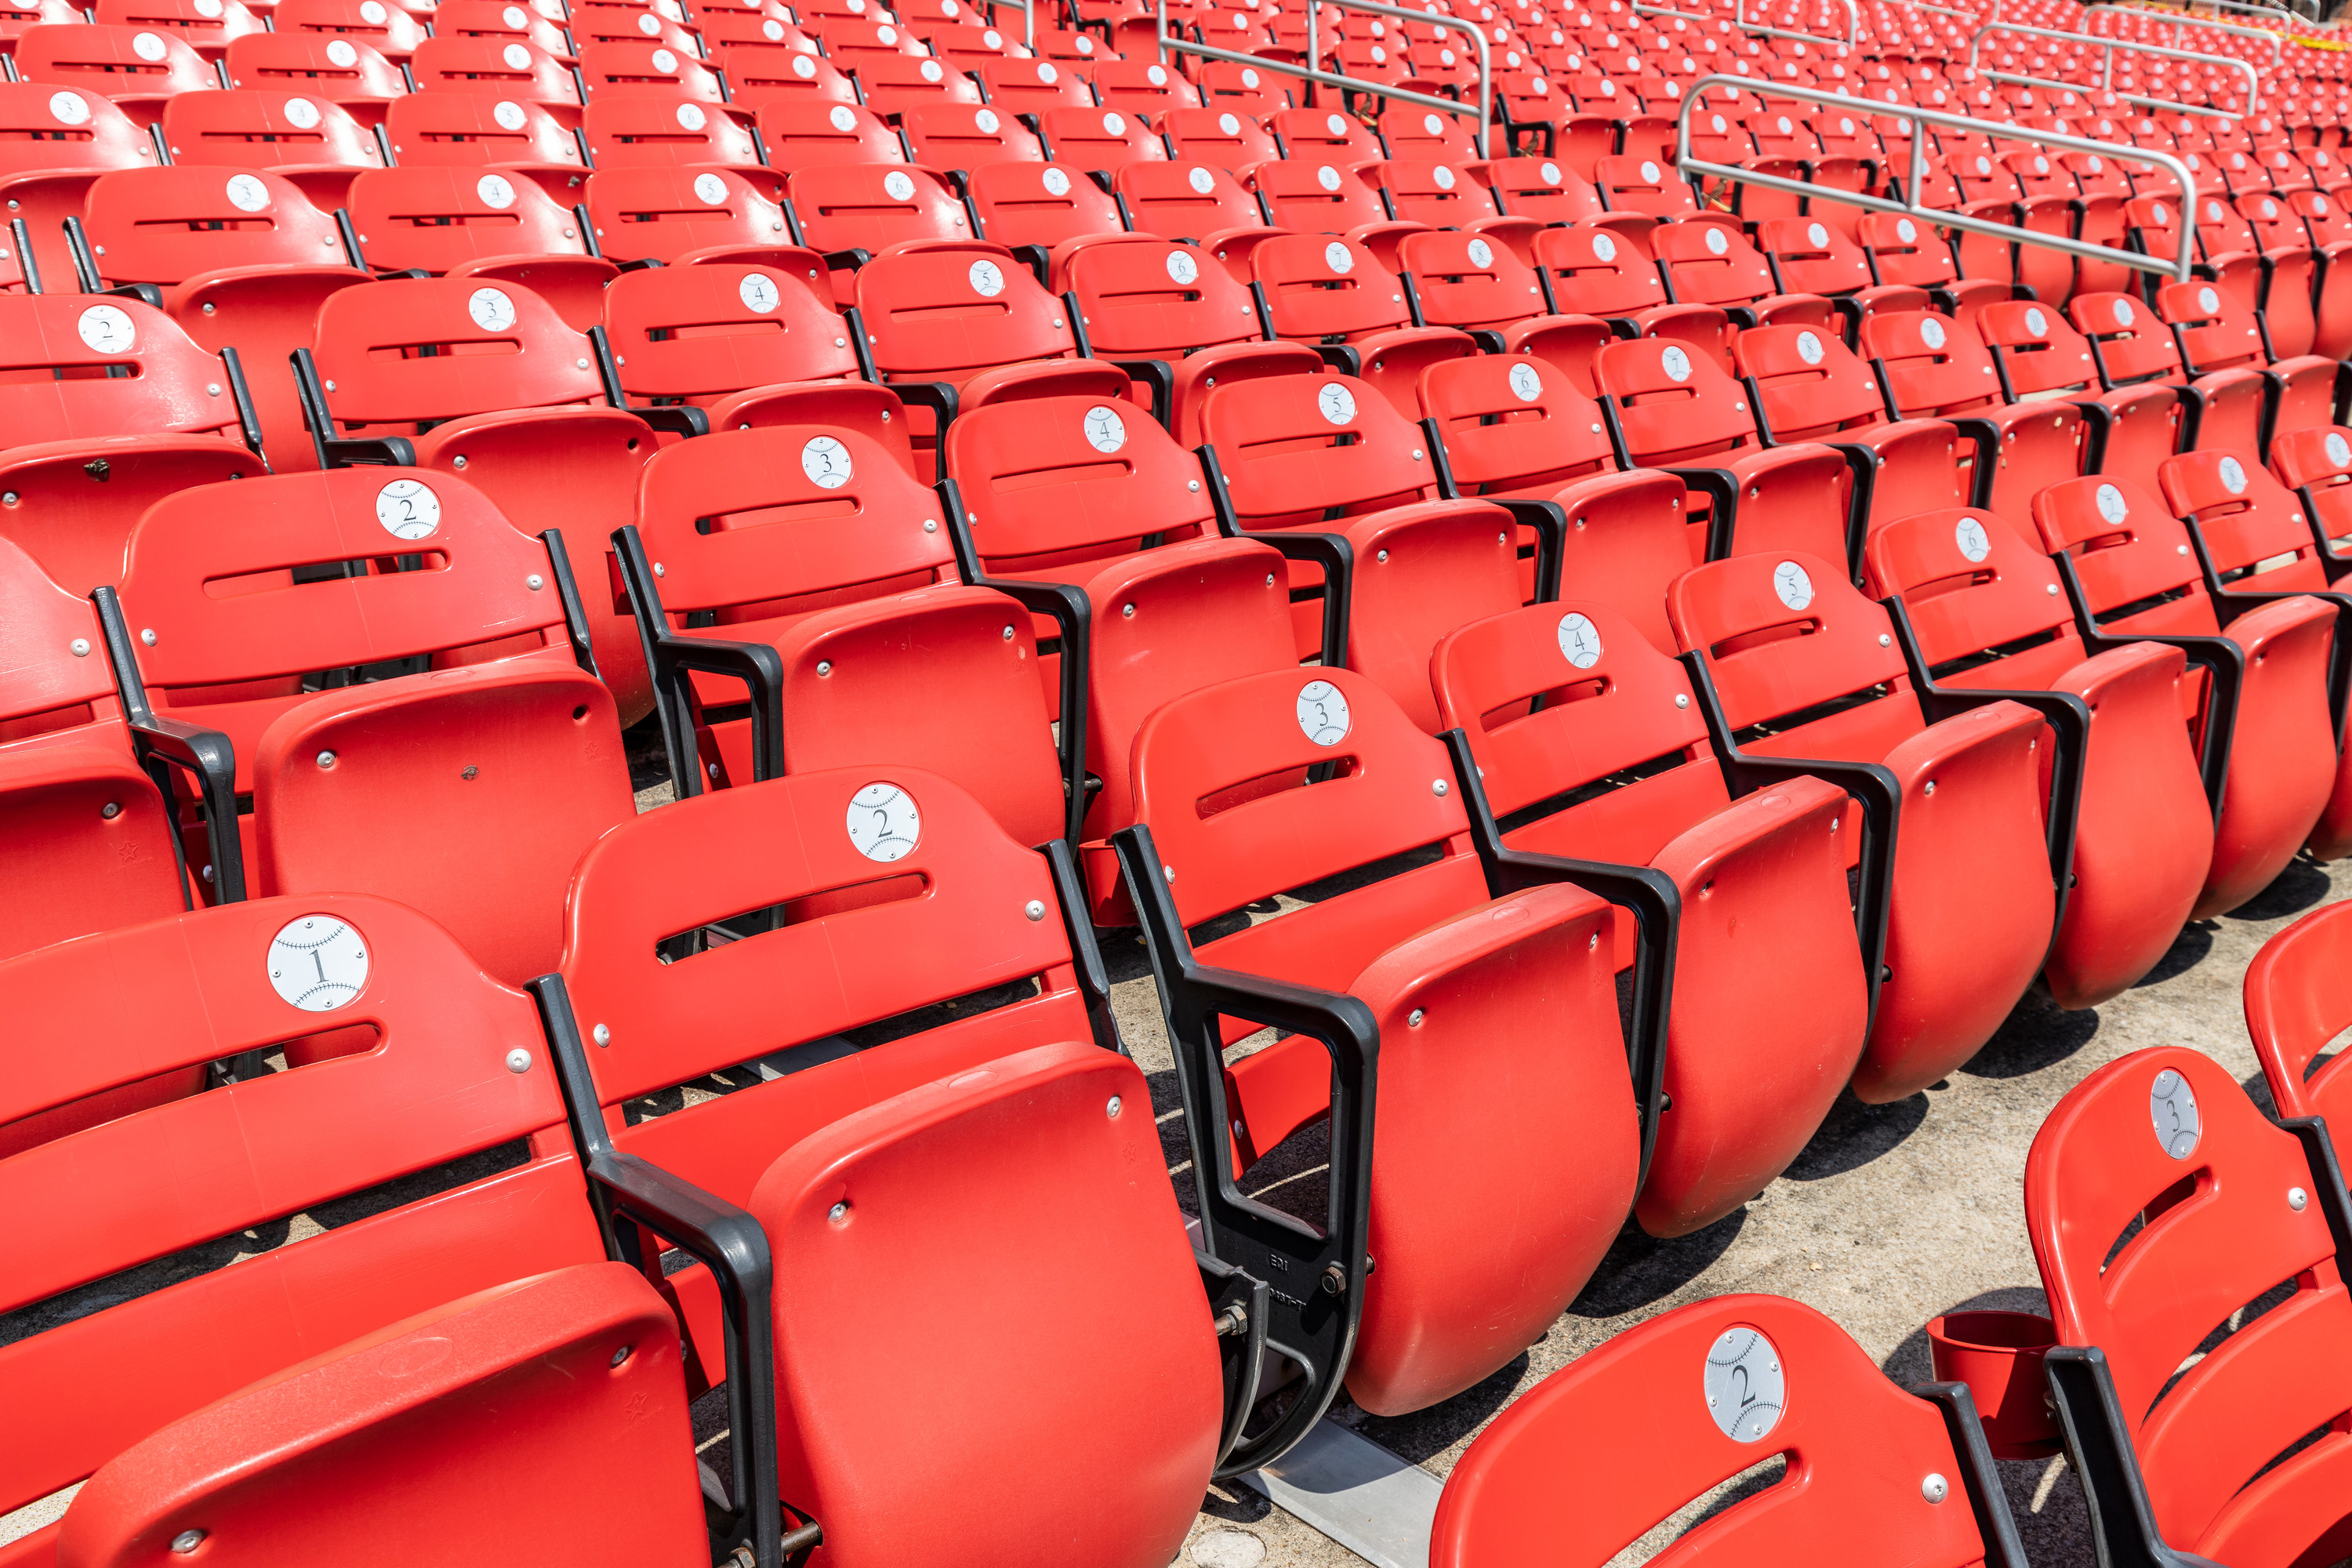 Rows of empty red bleacher seats in a stadium with numbers inside of baseball looking stickers